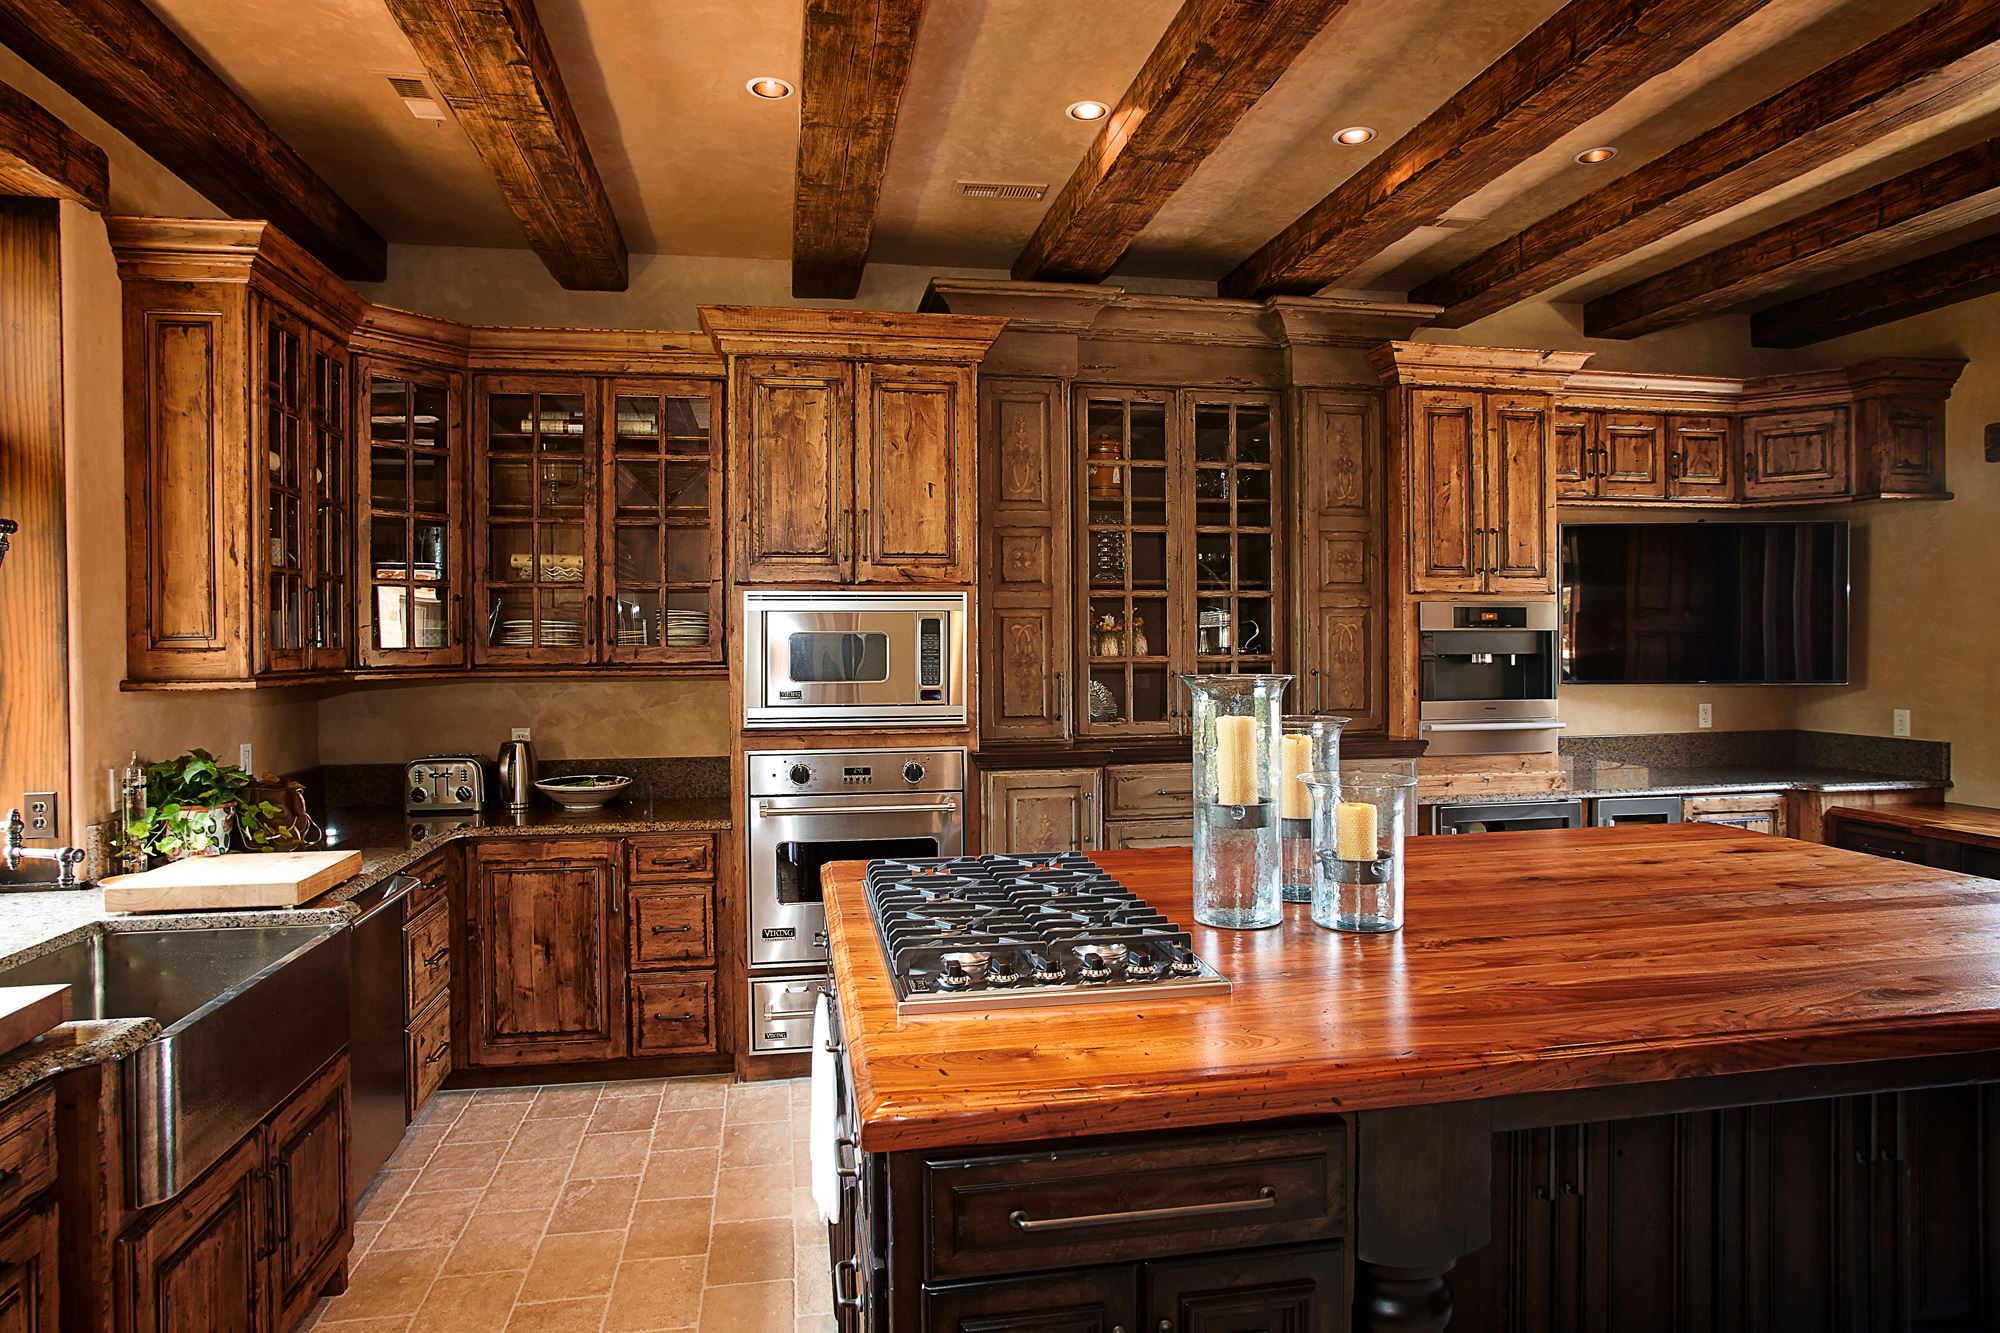 Rustic Beams | Gallery | Custom Wood Products - Handcrafted Cabinets